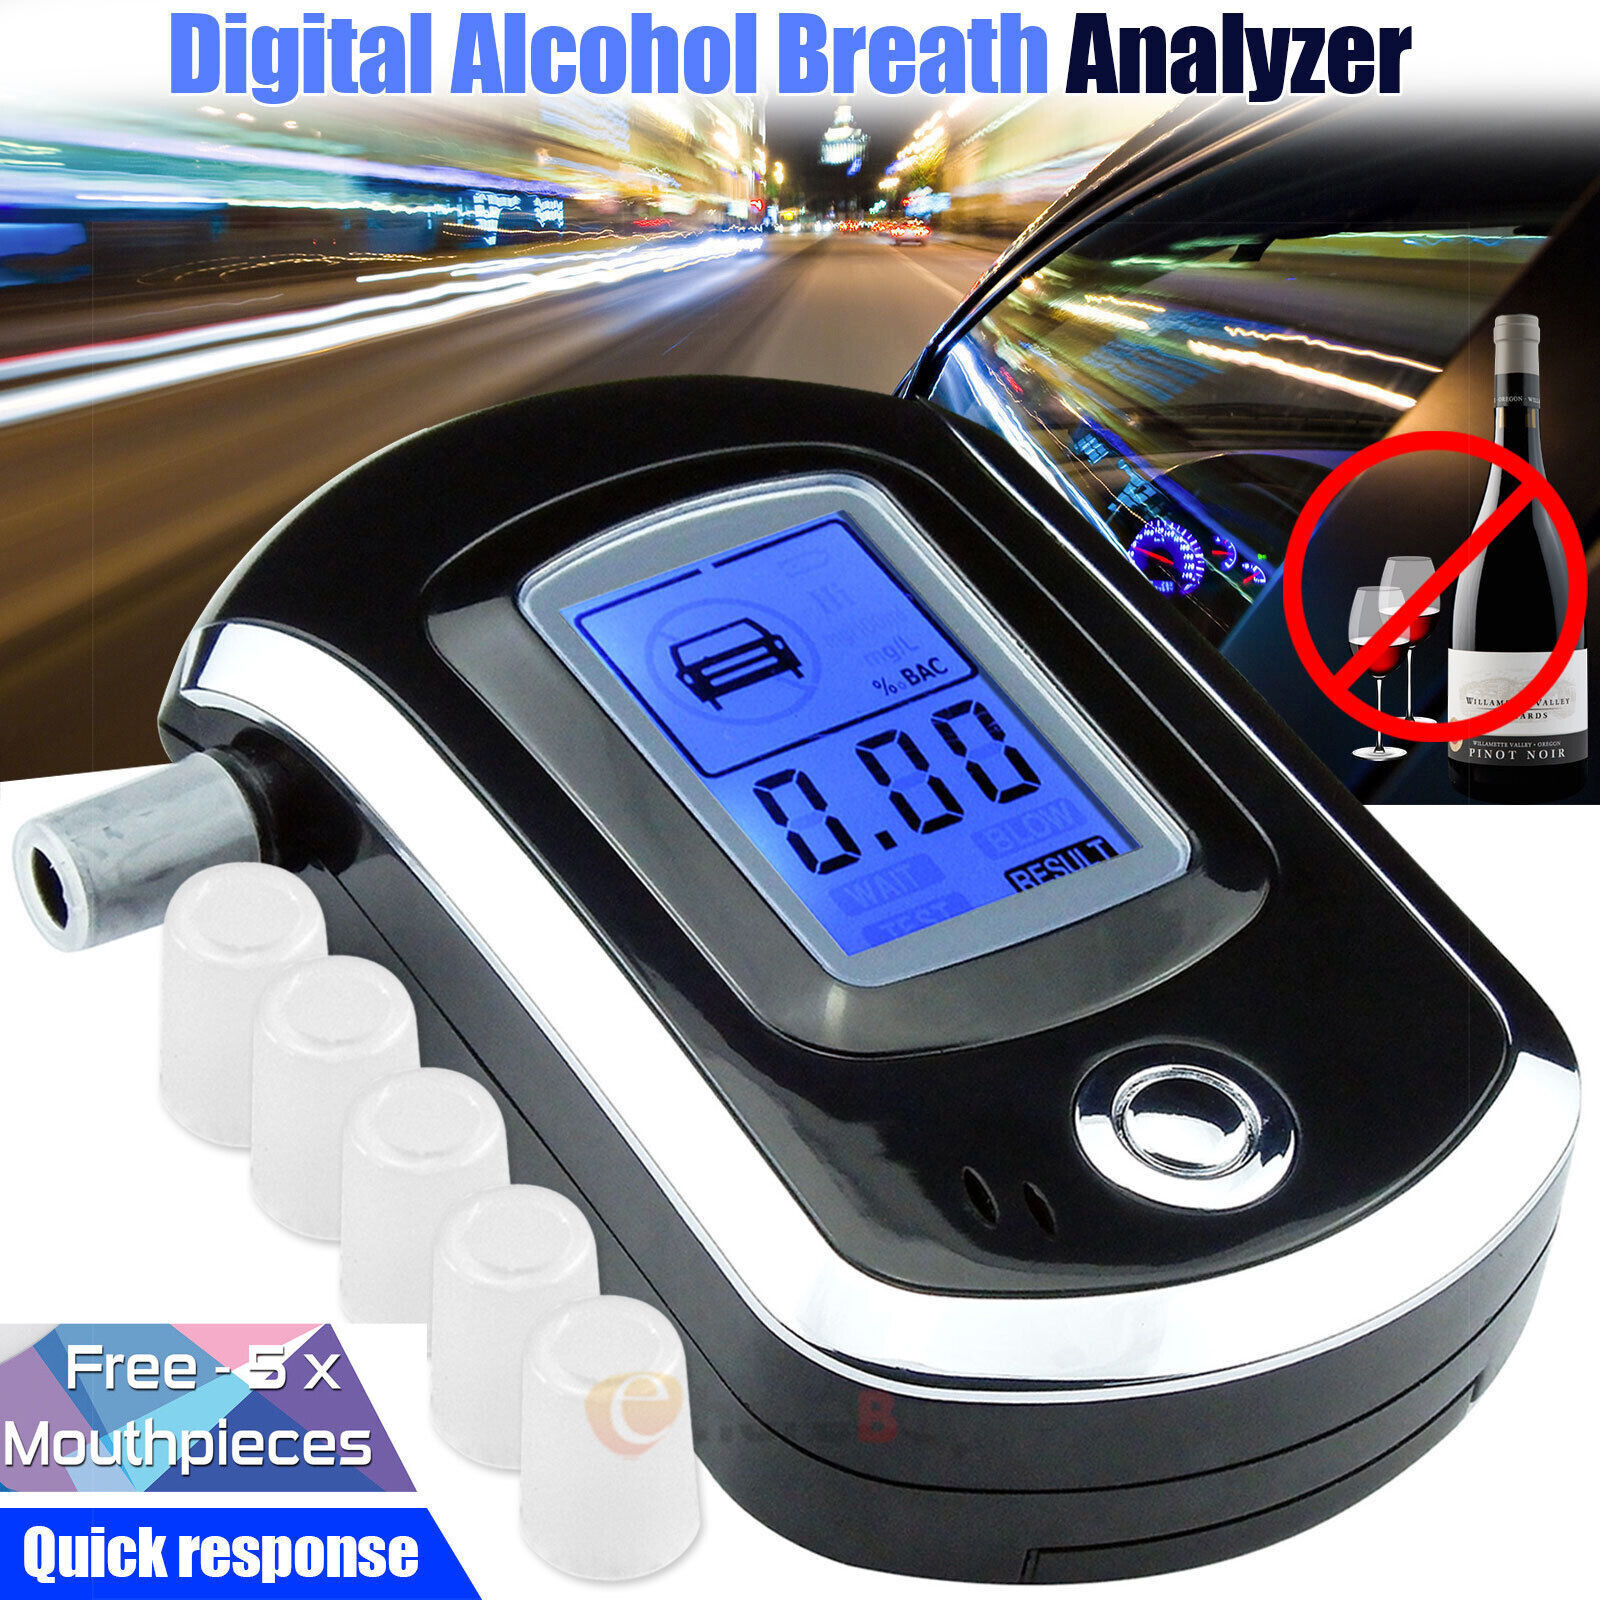 Advance Police Digital Breath Alcohol Tester LCD Breathalyzer Analyzer Detector Unbranded/Generic Does not apply